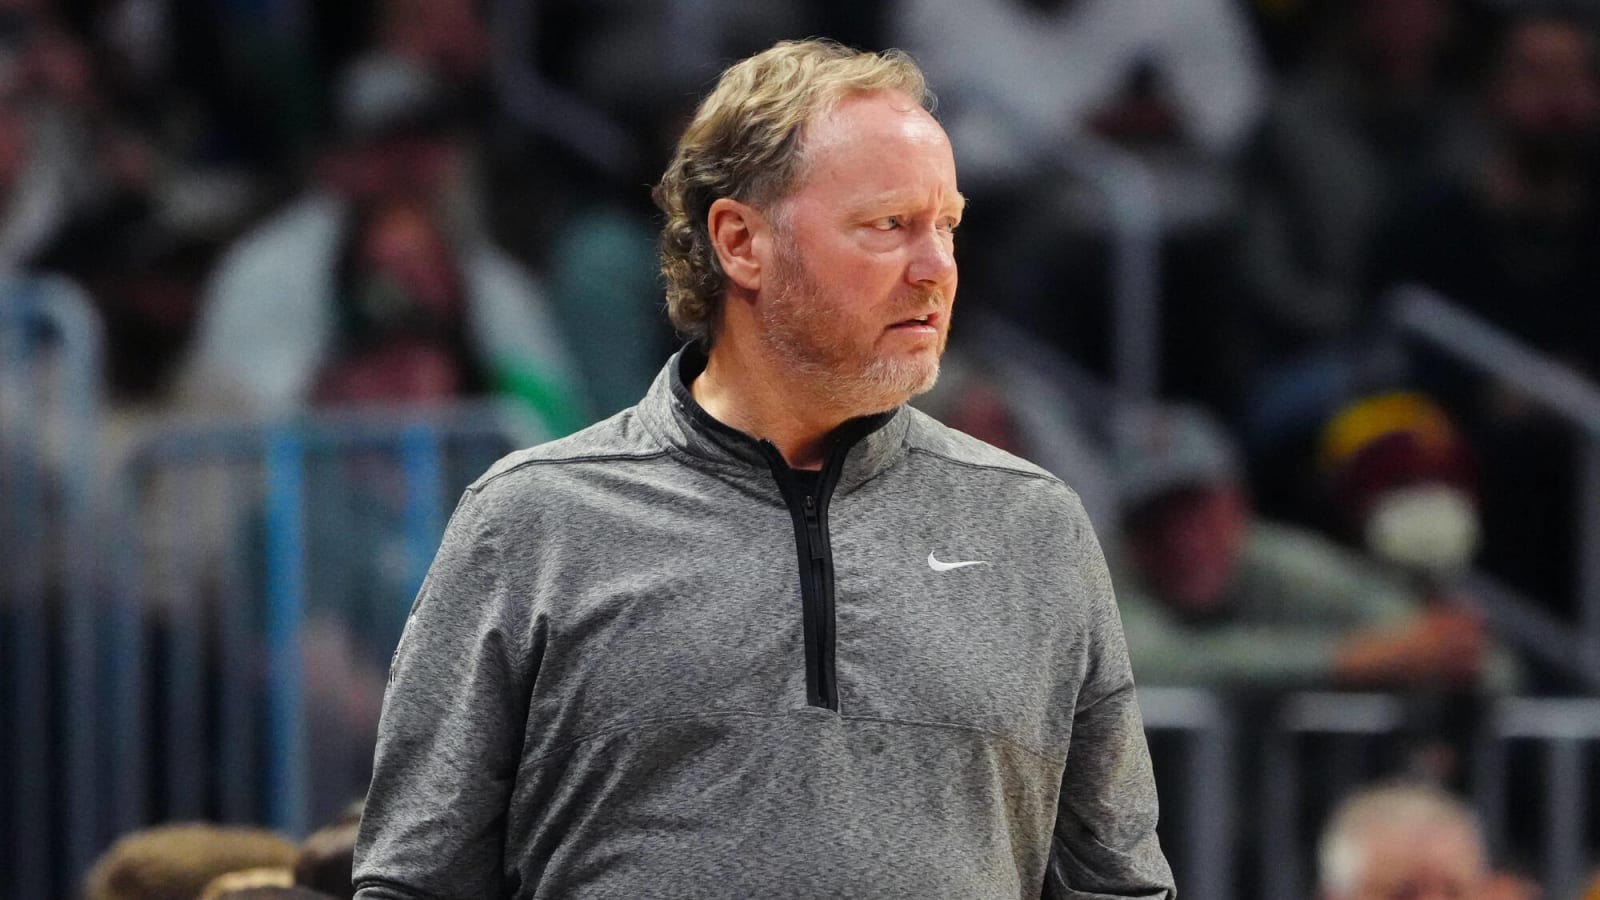 Los Angeles Lakers Rumors: NBA Analyst Floats LA Coach as Potential Mike Budenholzer Target